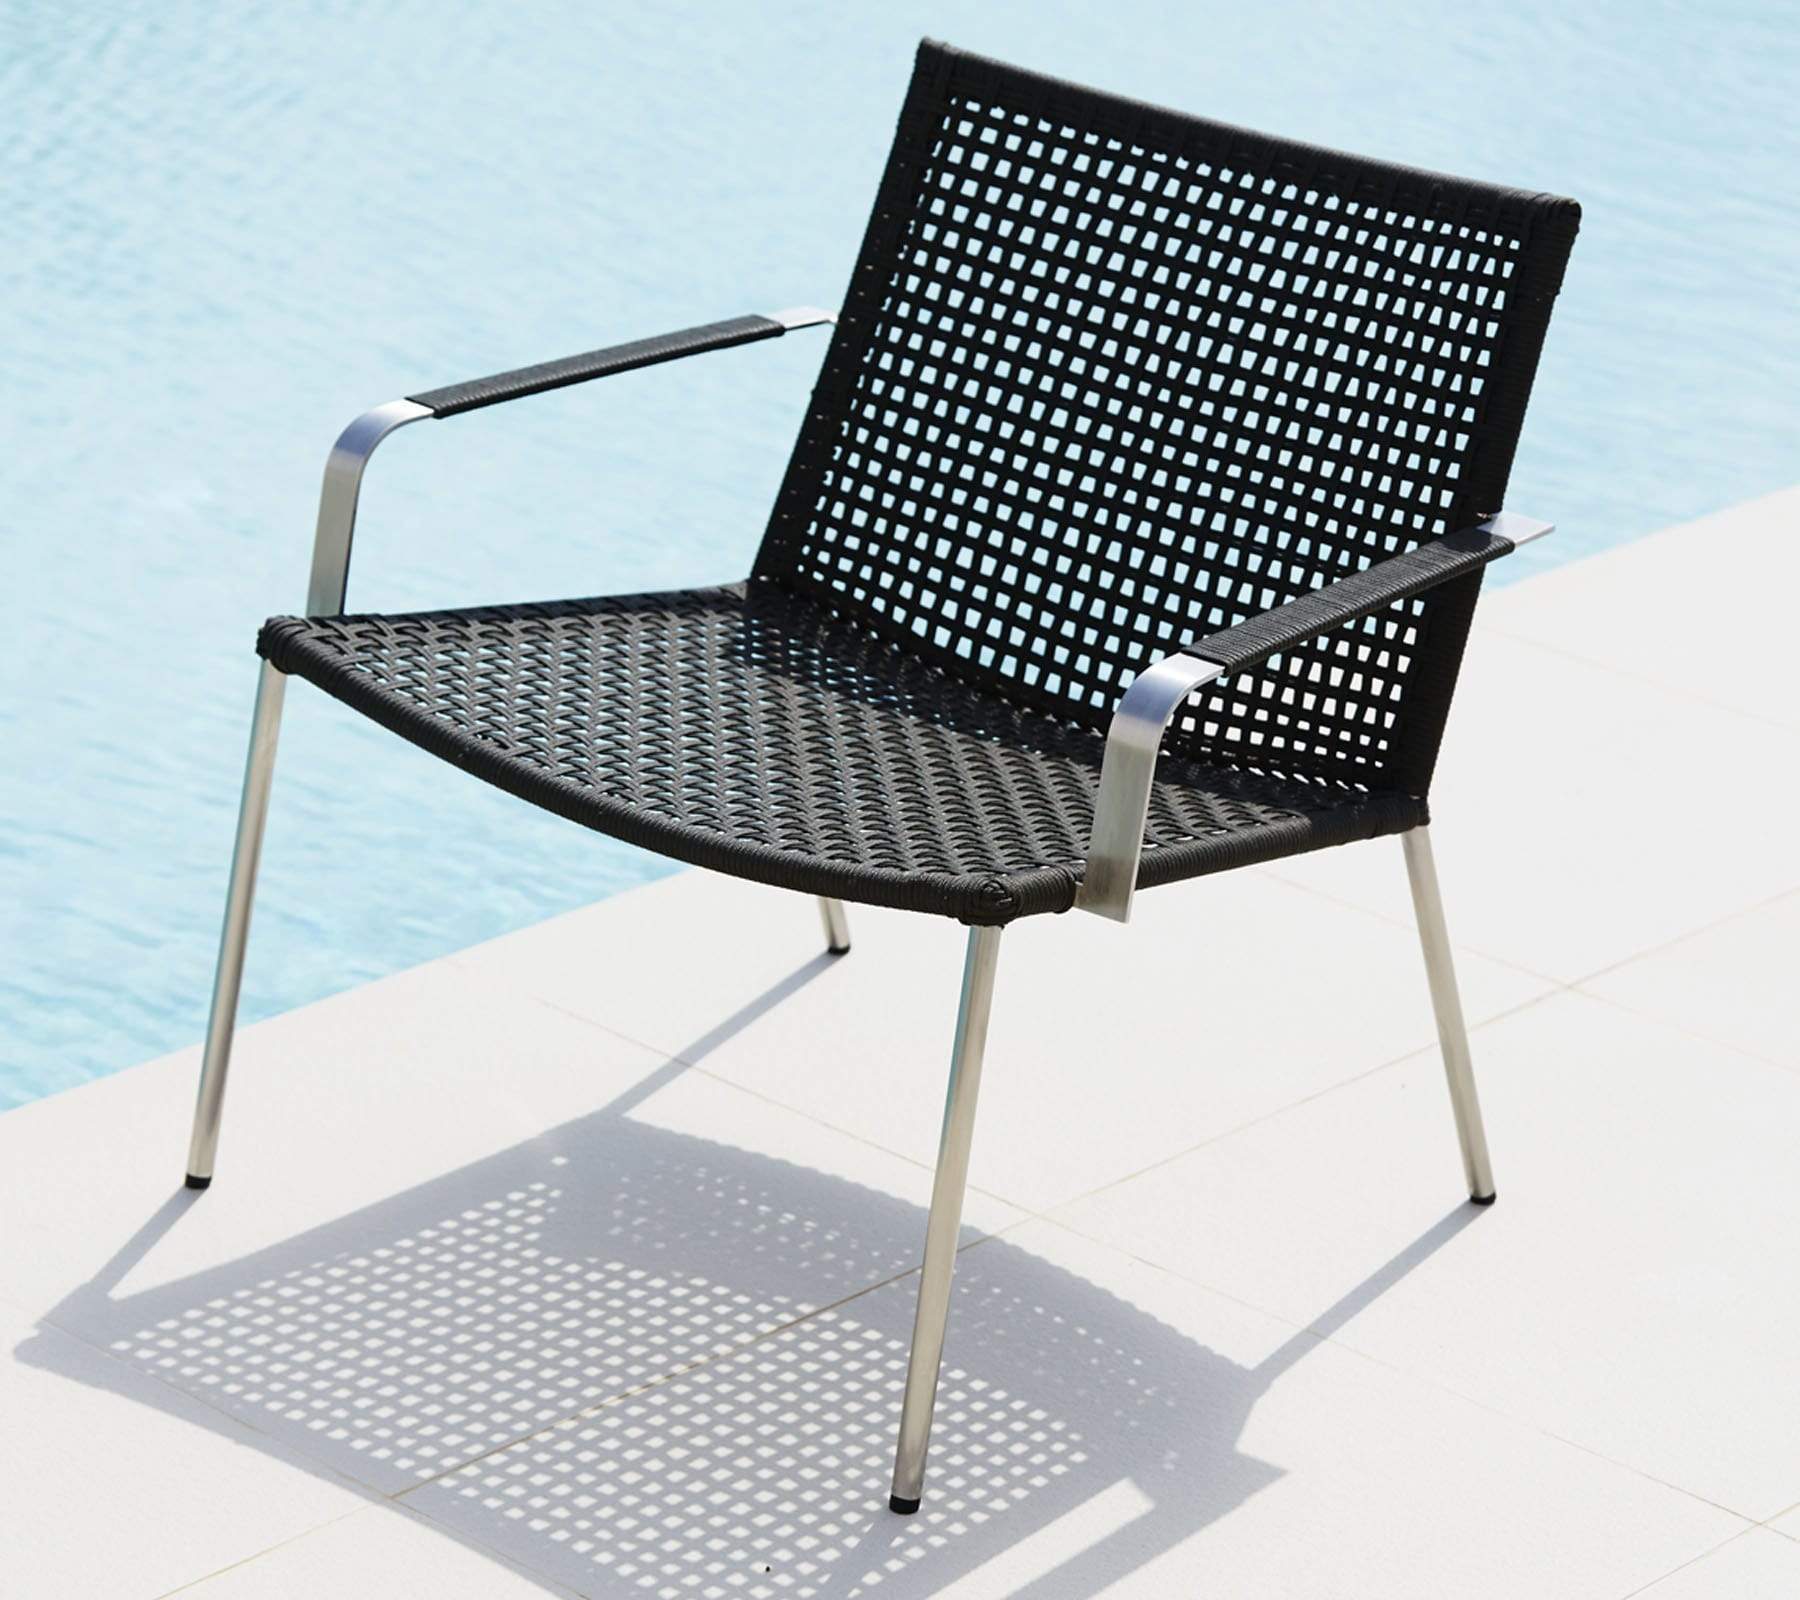 Boxhill's Straw dark grey outdoor lounge chair stainless steel frame placed on poolside